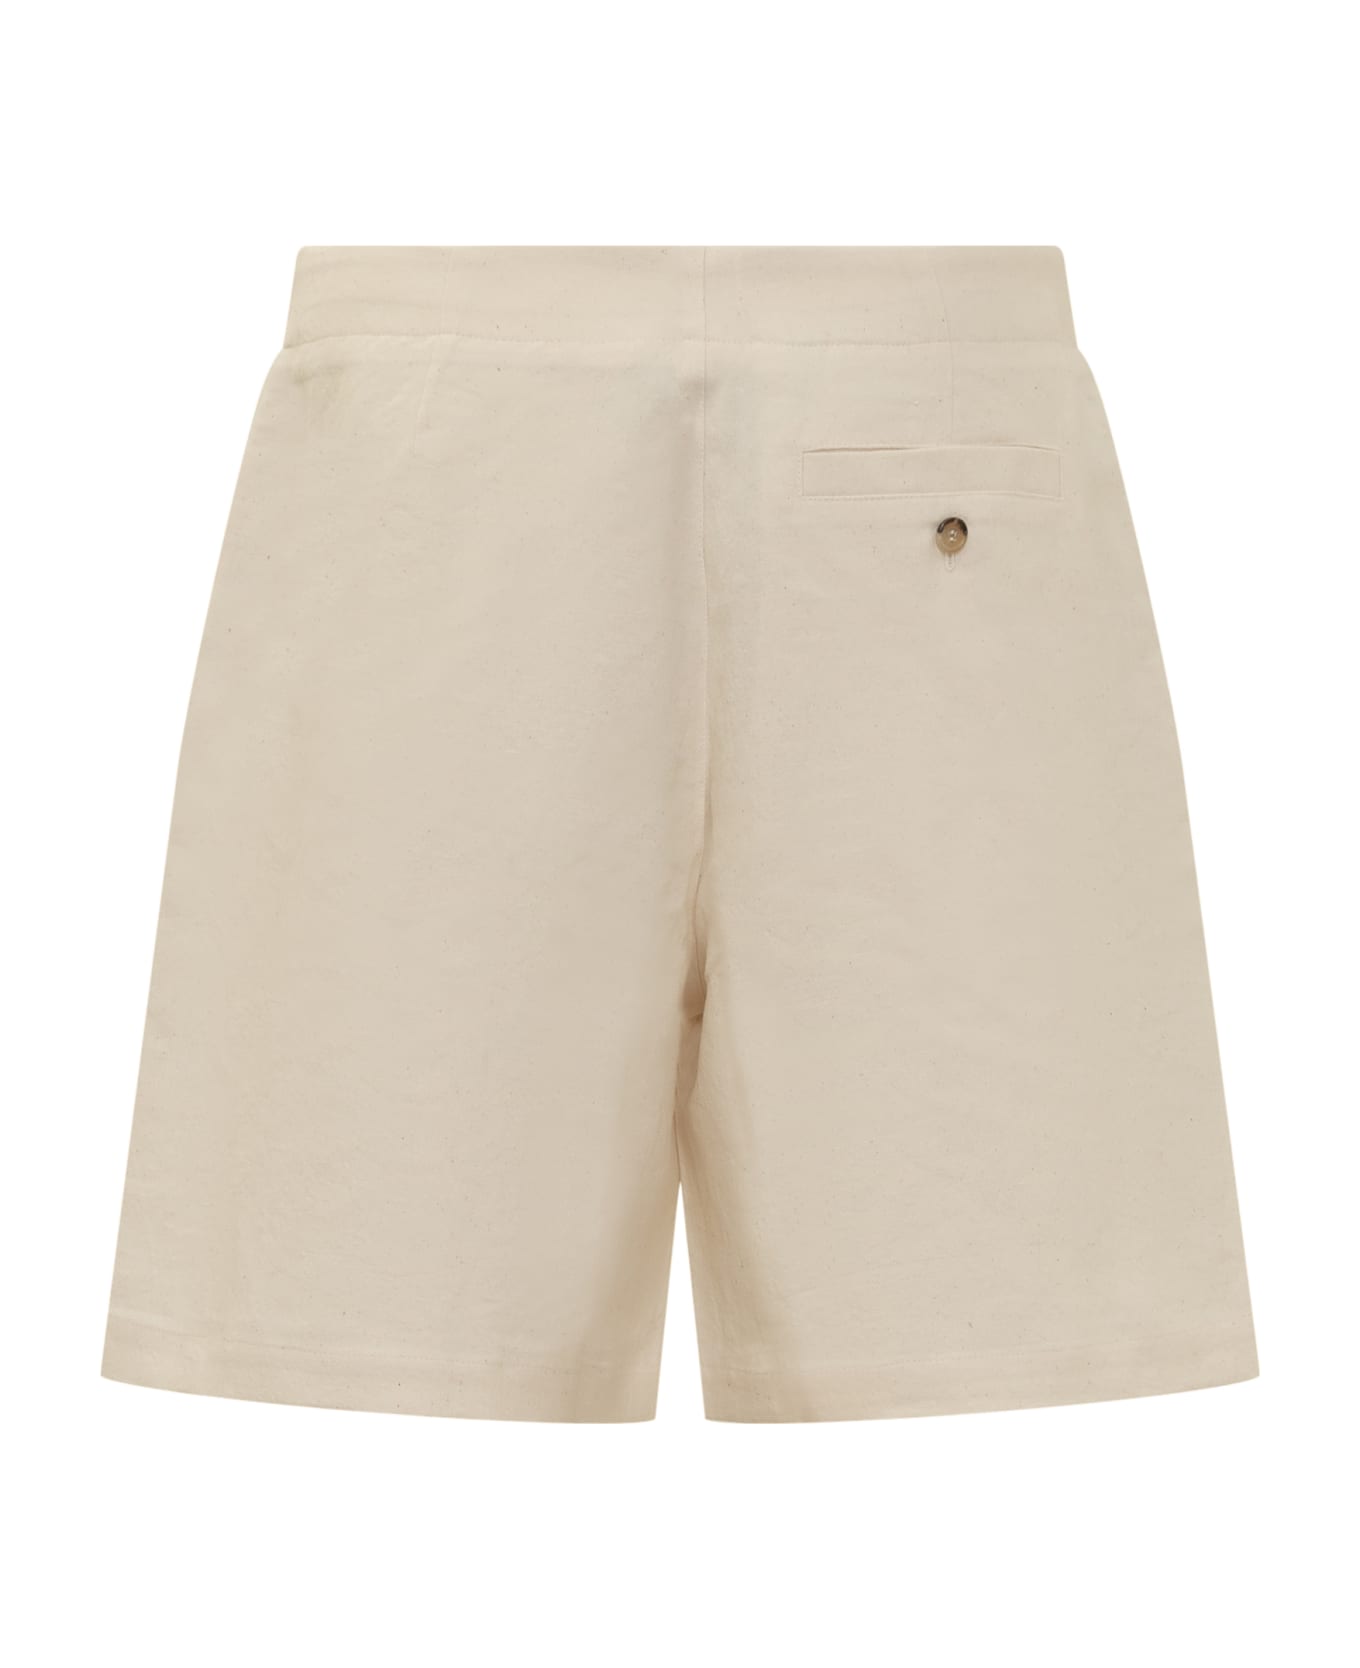 J.W. Anderson Shorts - OFF WHITE